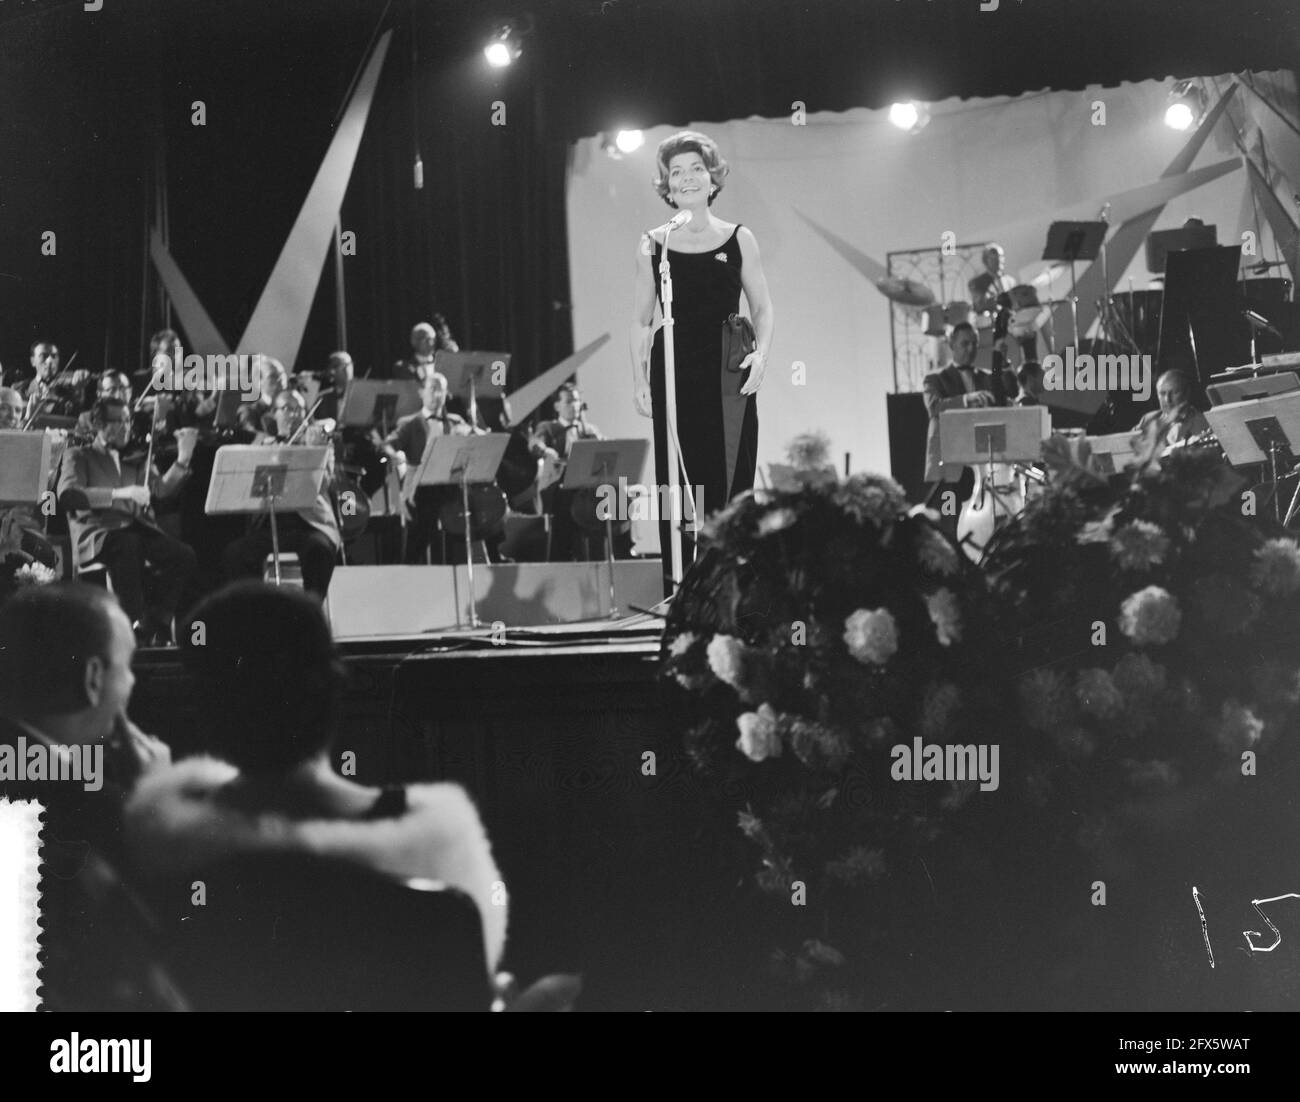 Grand Gala Du Disque in Kurhaus. Lys Assia, September 30, 1961, The Netherlands, 20th century press agency photo, news to remember, documentary, historic photography 1945-1990, visual stories, human history of the Twentieth Century, capturing moments in time Stock Photo